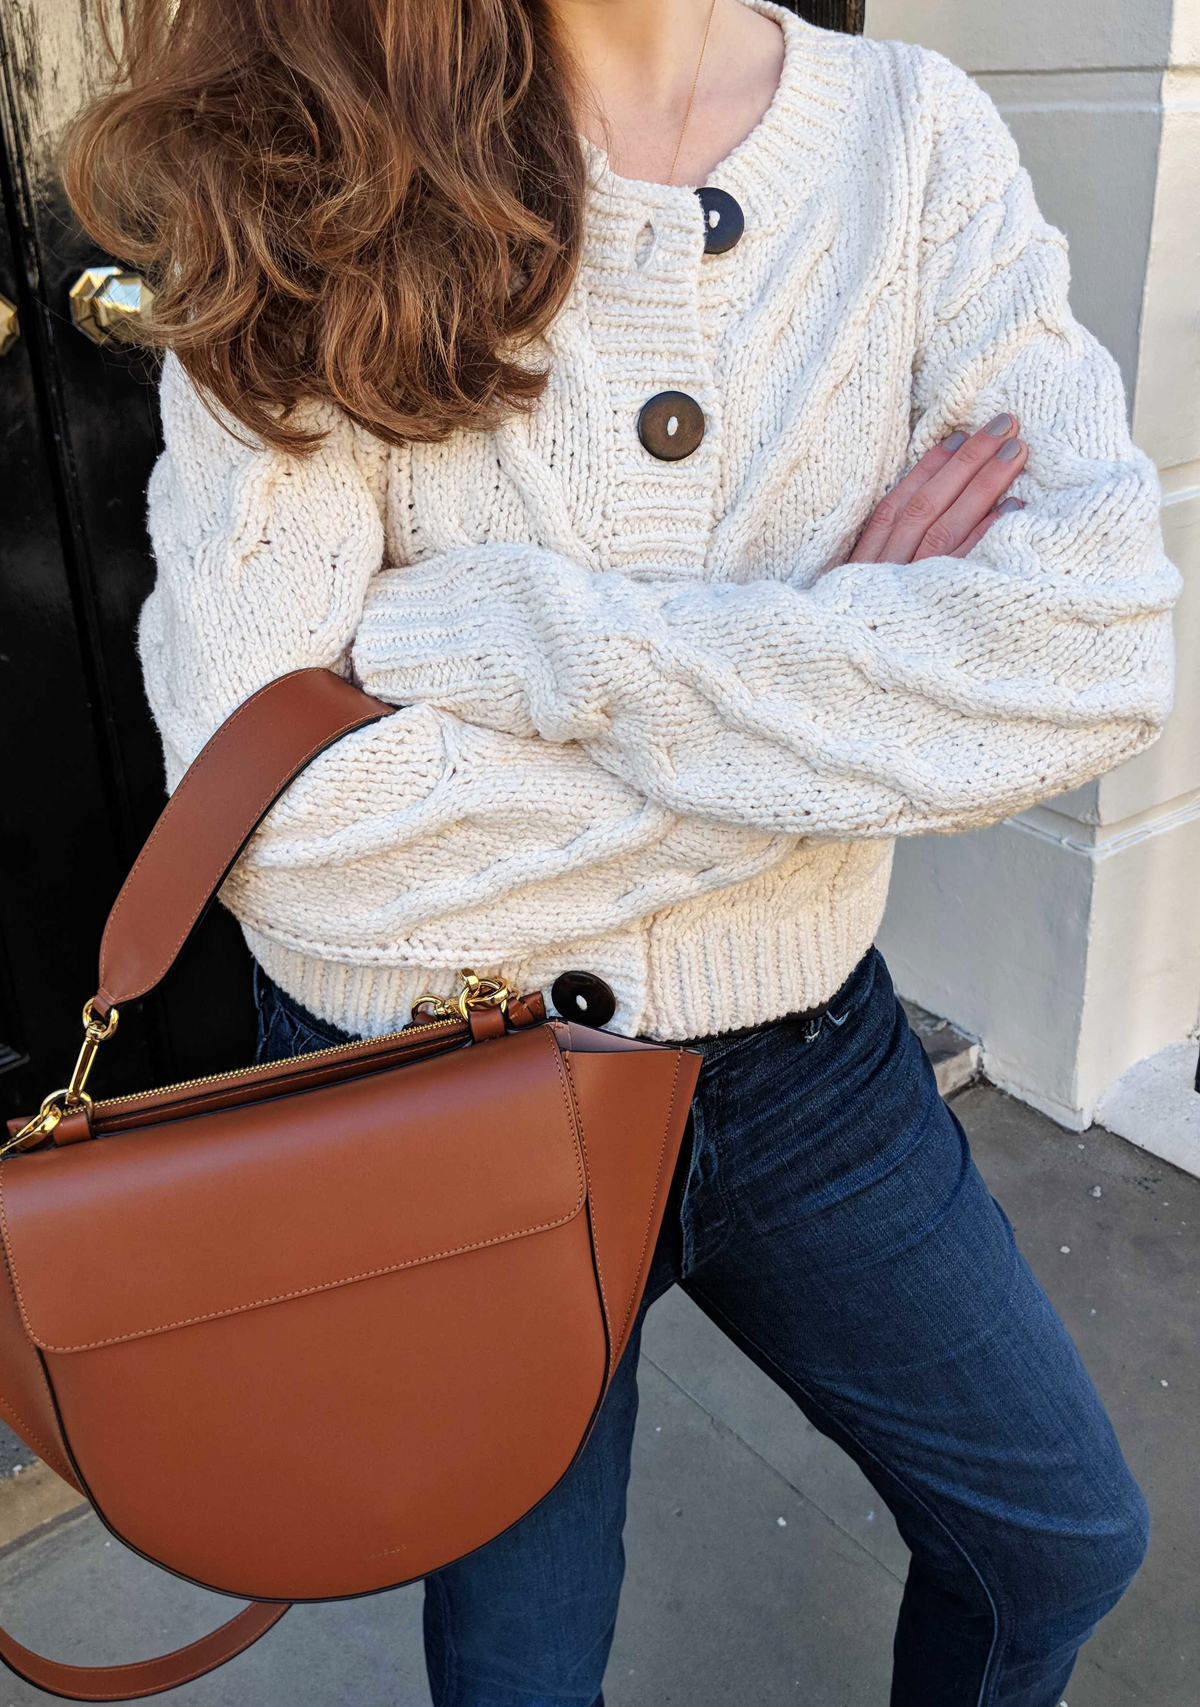 Best knitwear 2020: beige chunky cardigan and jeans